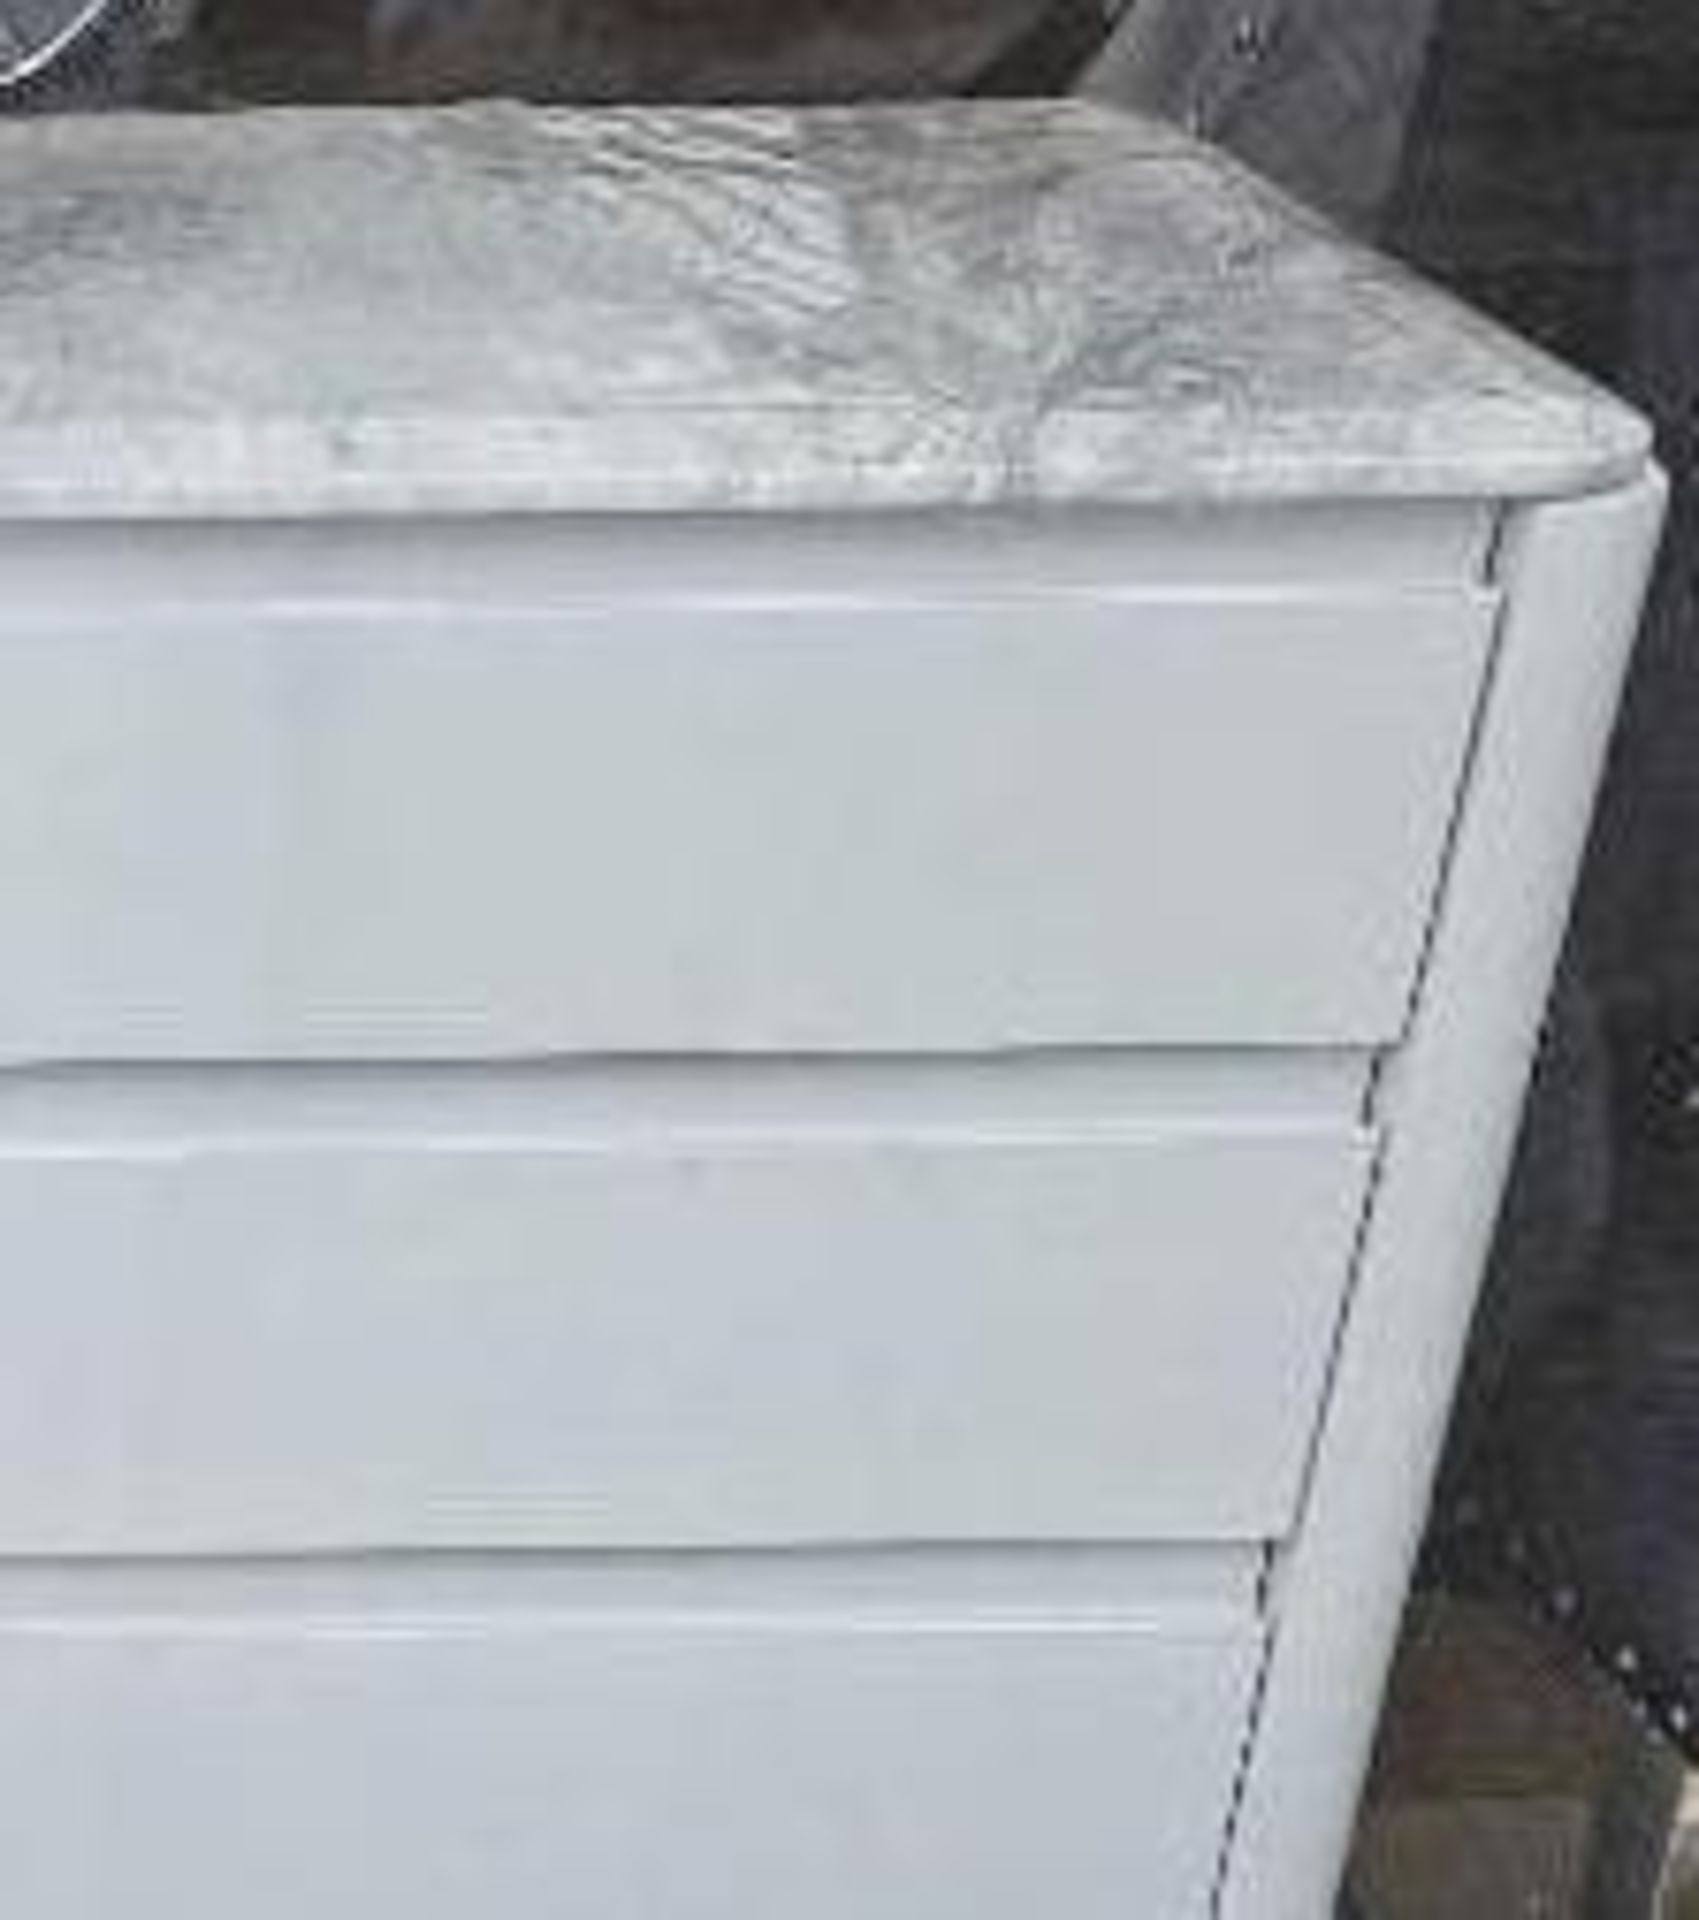 *EX DISPLAY* Furniture Village Dolce side Board in Gloss White with Marble Top. - Image 2 of 5